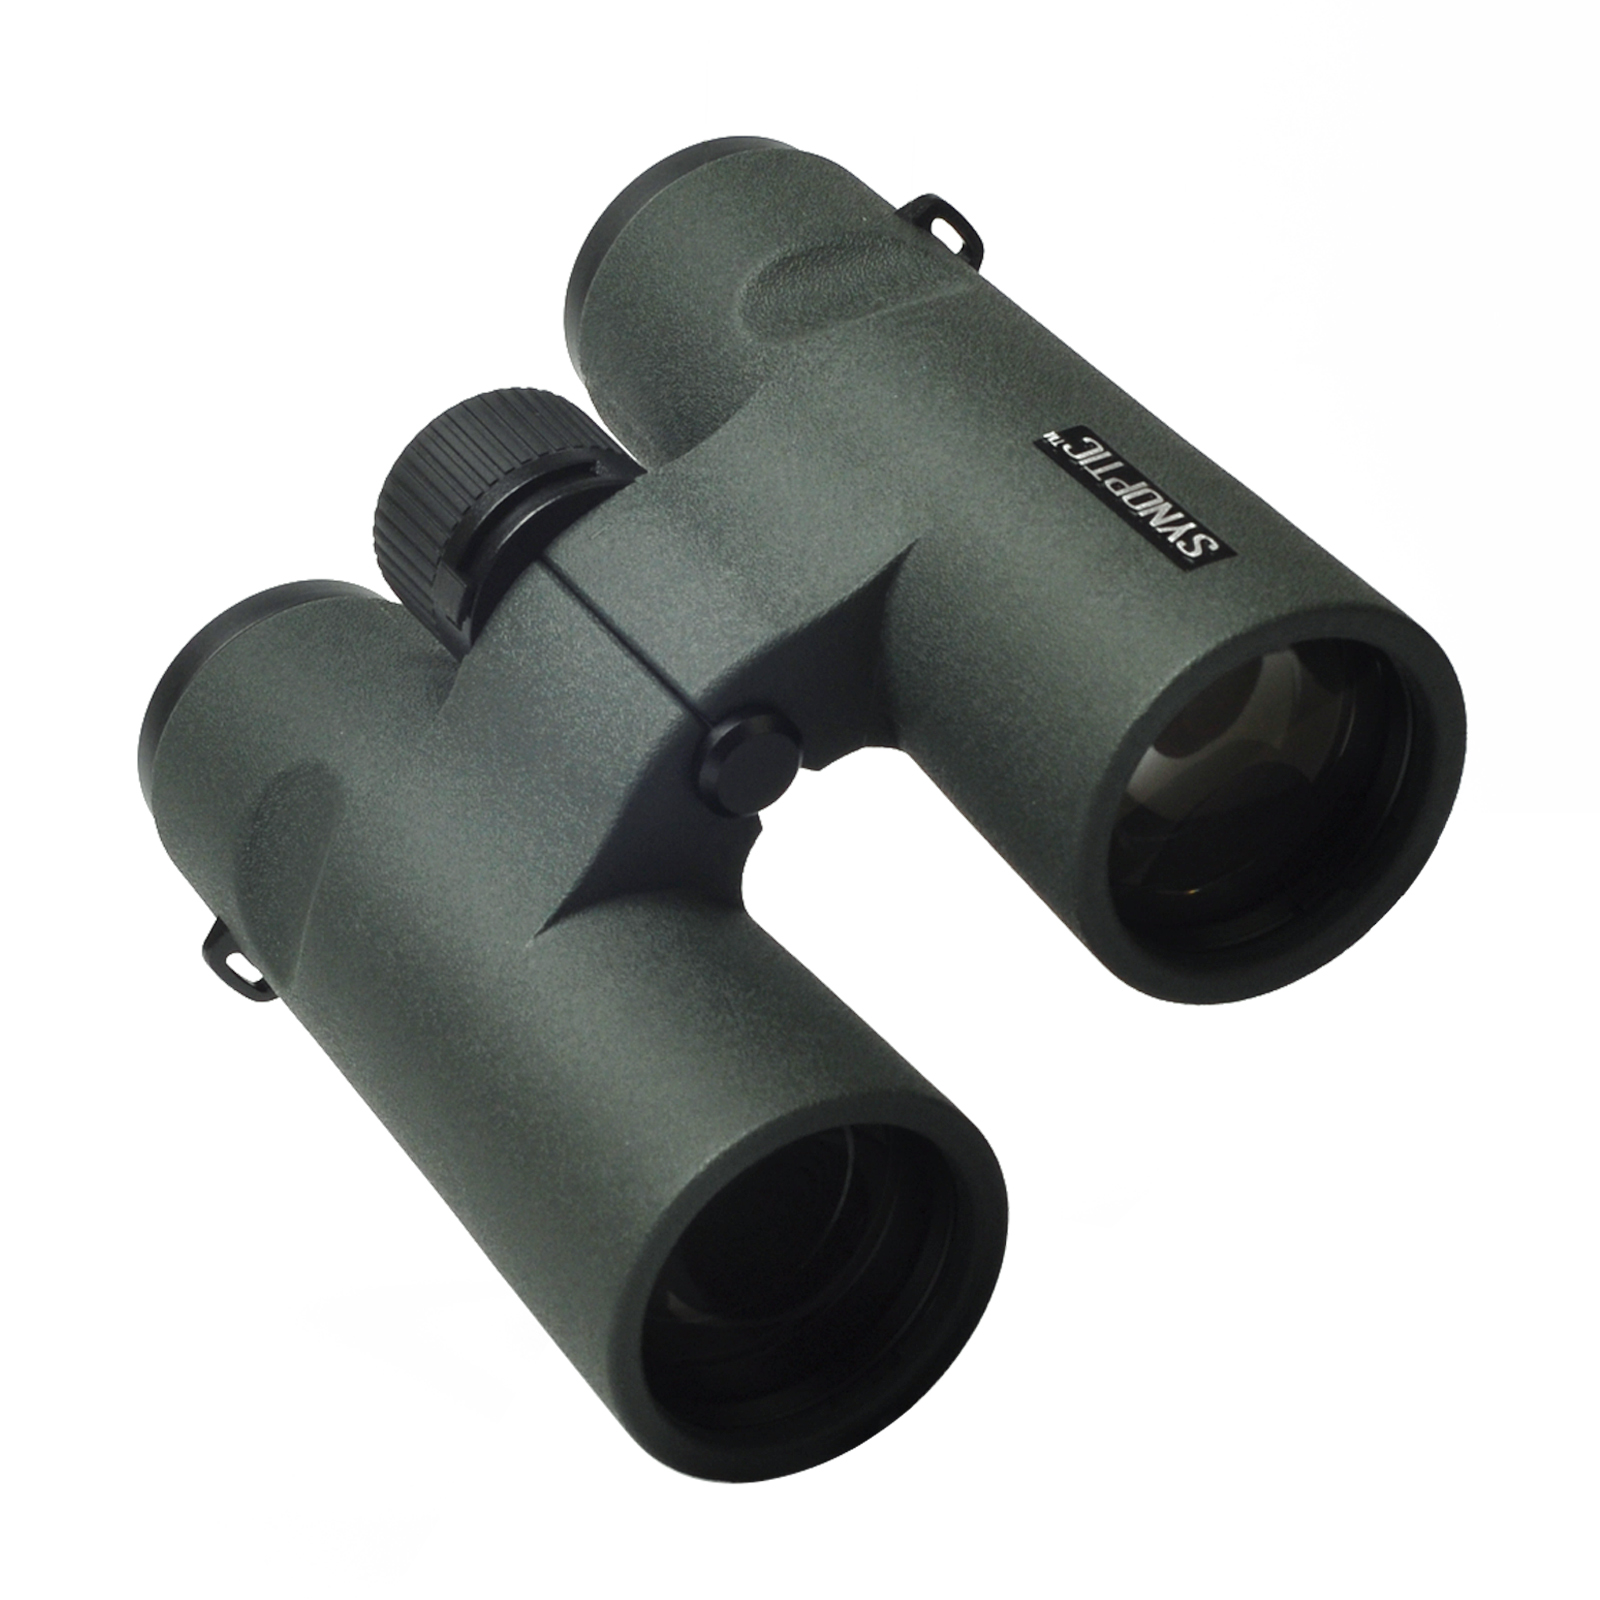 Givite 10X42EDII Binoculars - Diamond White Coating with Bak4 Prisms-Waterproof Fogproof, Rubber Armored Binocular for Bird Watching Hunting Outdoor Sports Travel Theater and Concerts